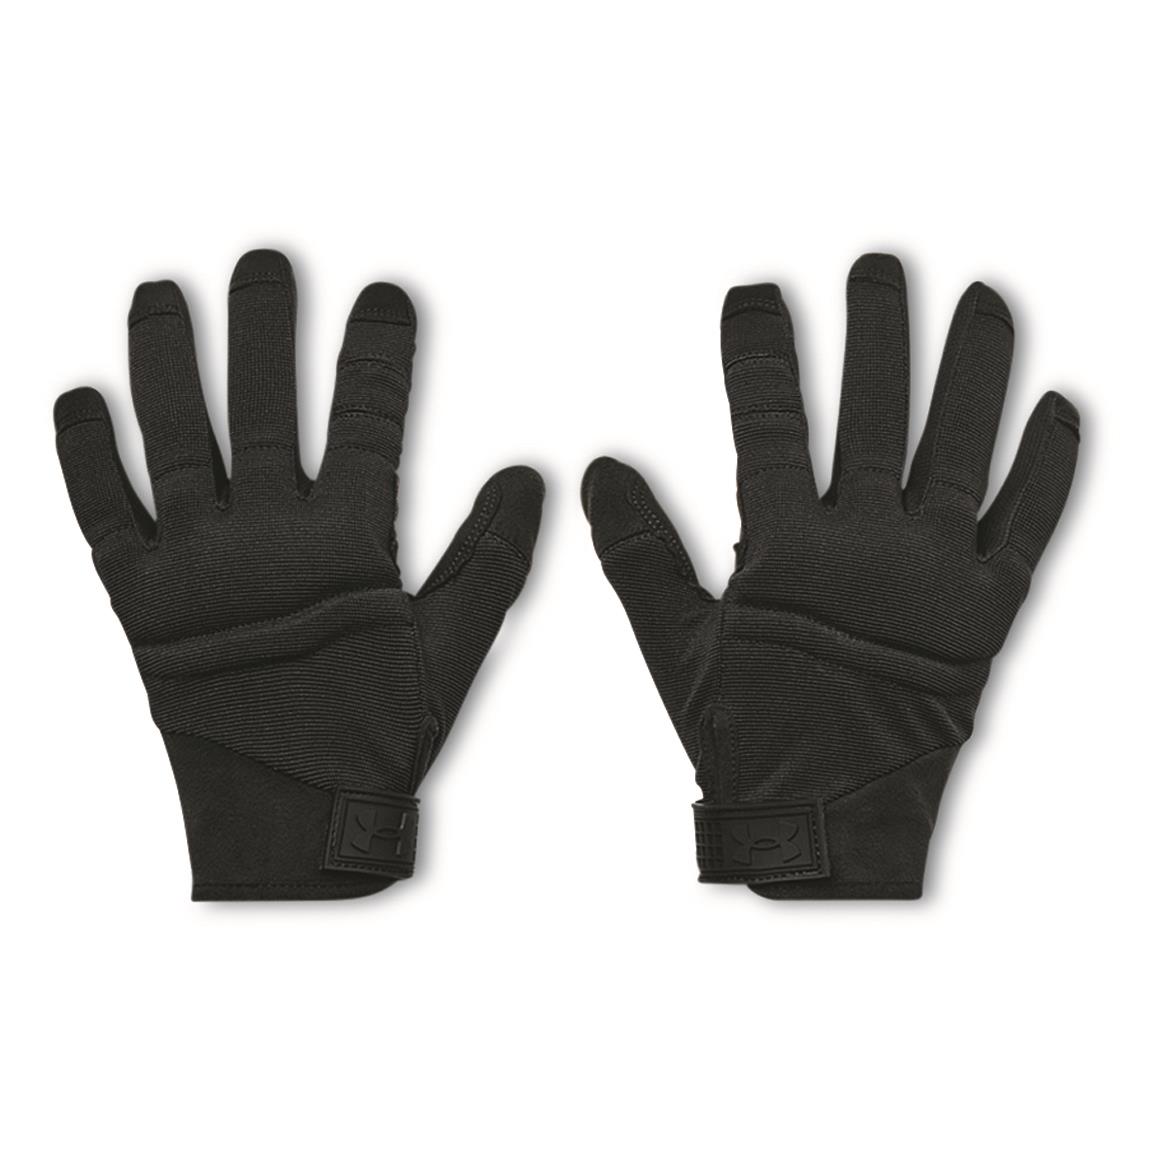 Tech touch print on thumbs and fingers, Black/Black/Black